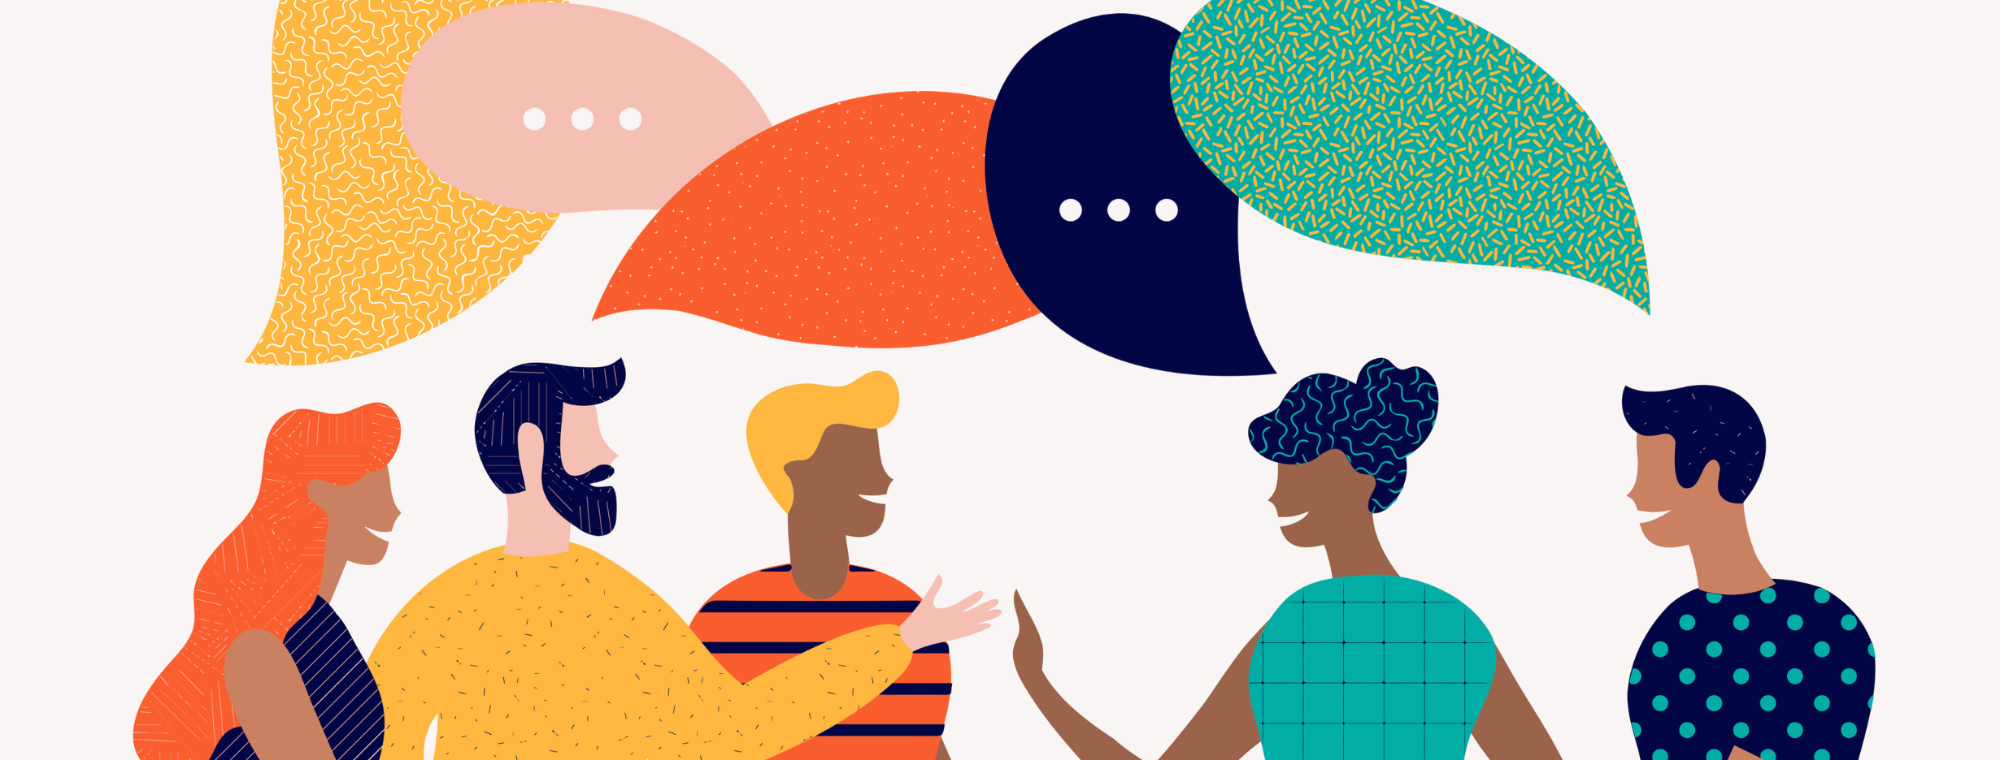 Illustration of five people talking with speech bubbles above their heads